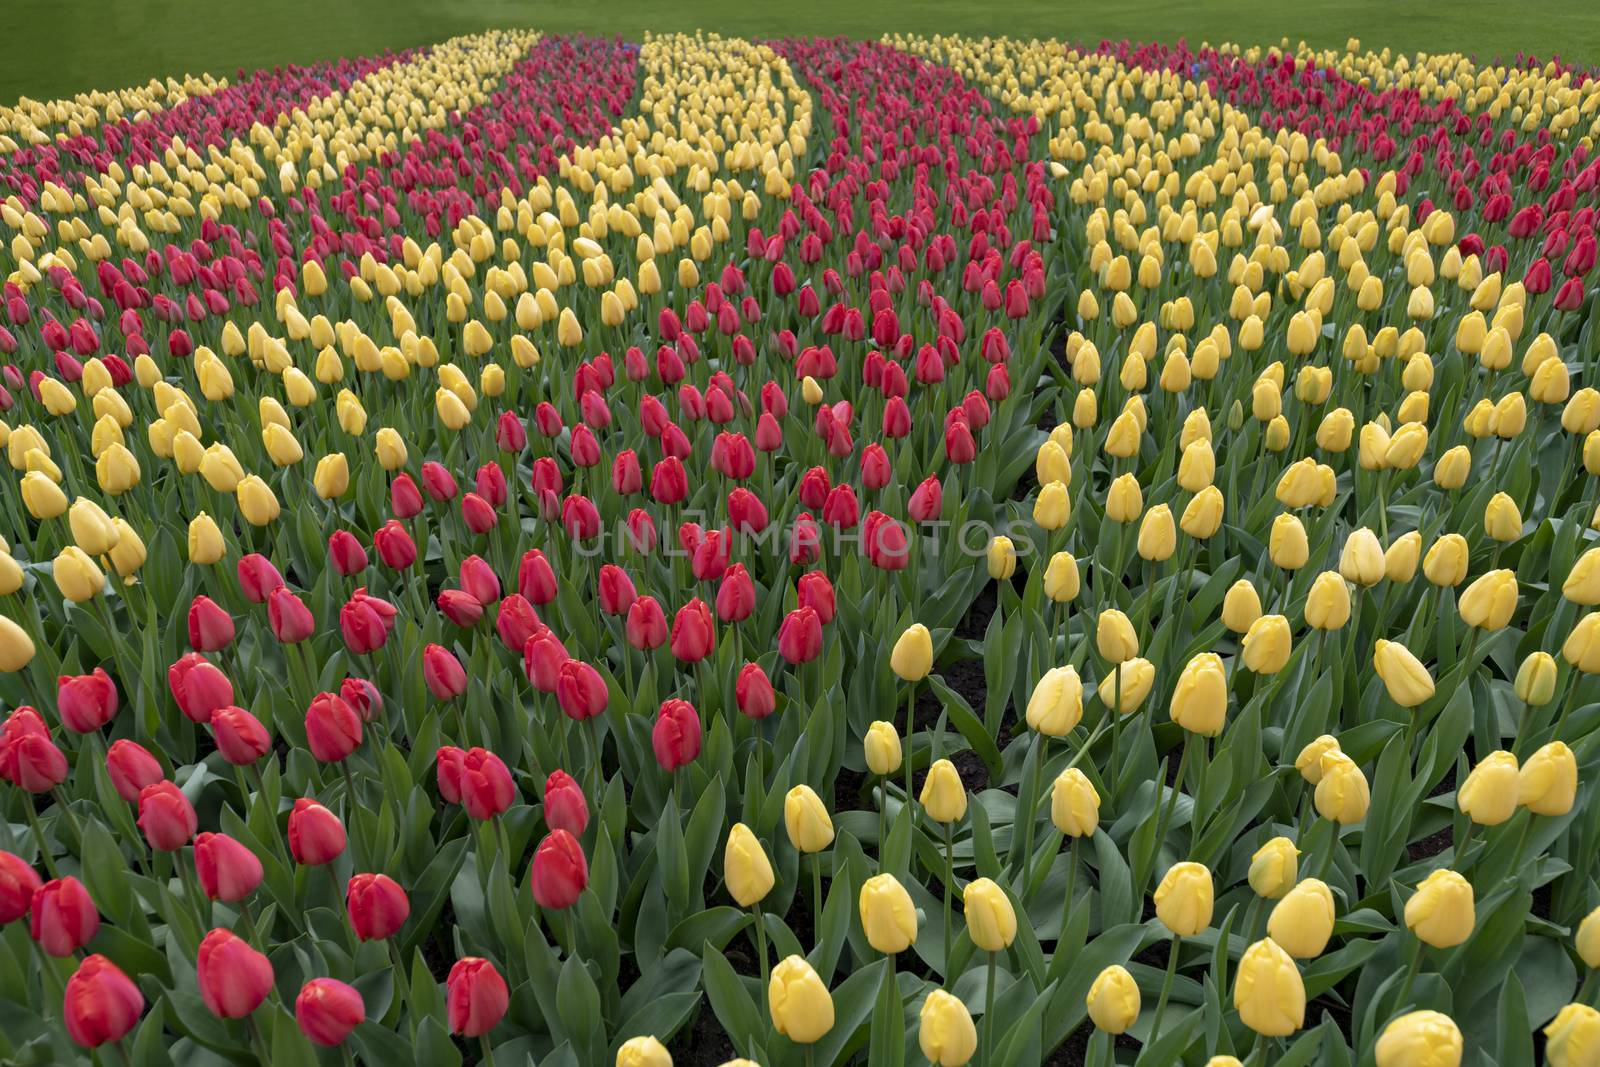 Duo color red and yellow tulips flowers blooming in curve shape on a well maintained green grassed garden in spring time by ankorlight